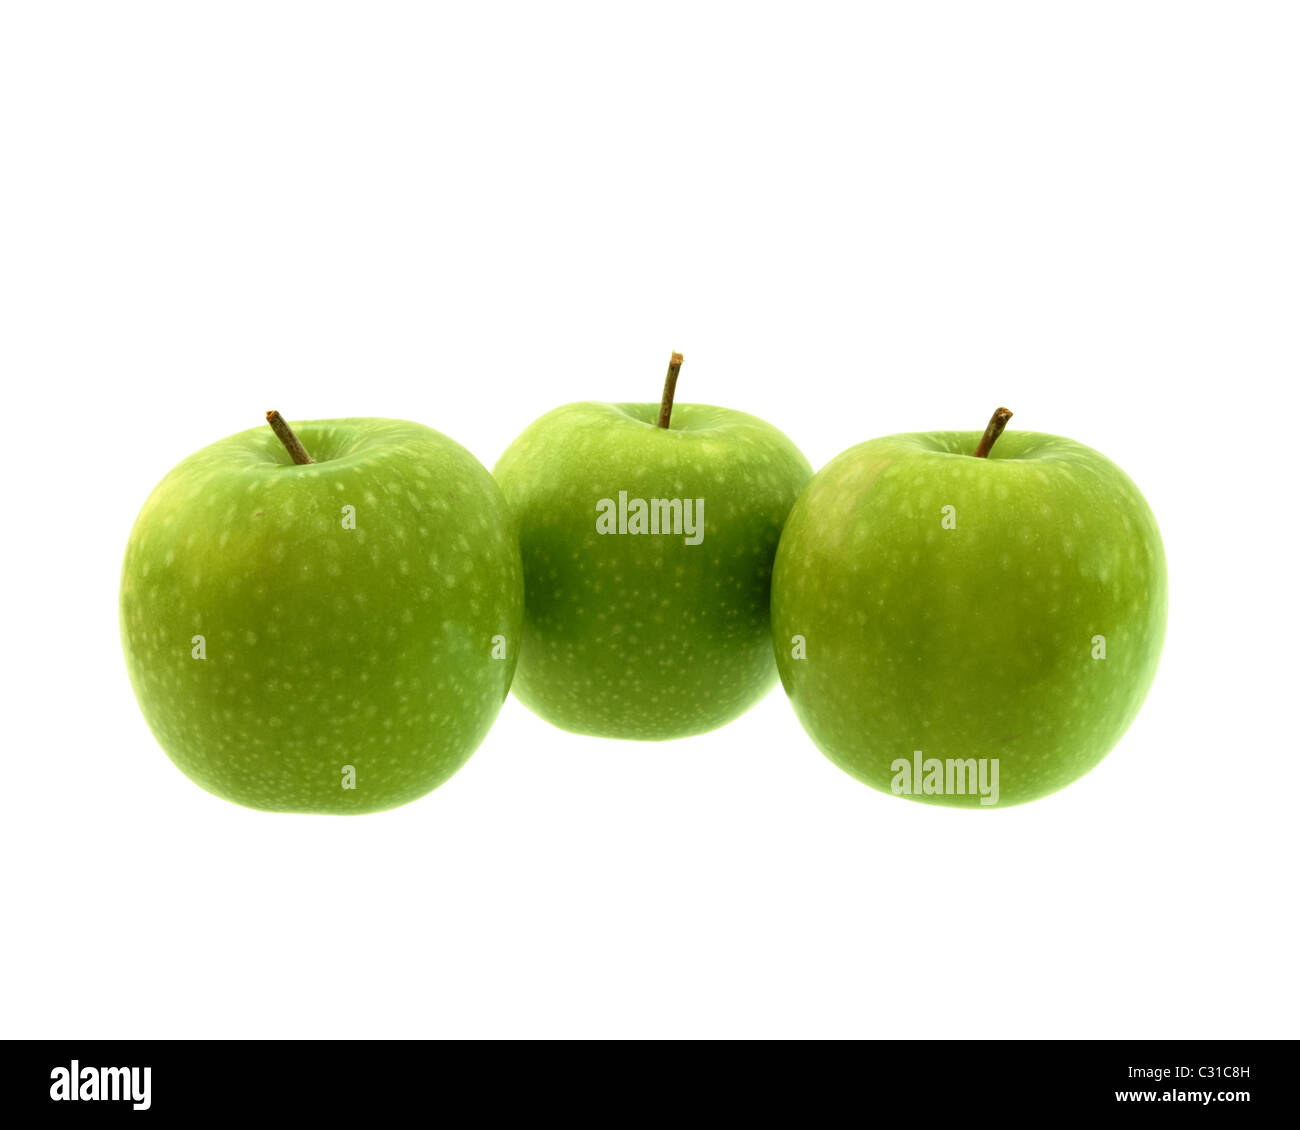 Three green apples in a line isolated on a white background. Stock Photo